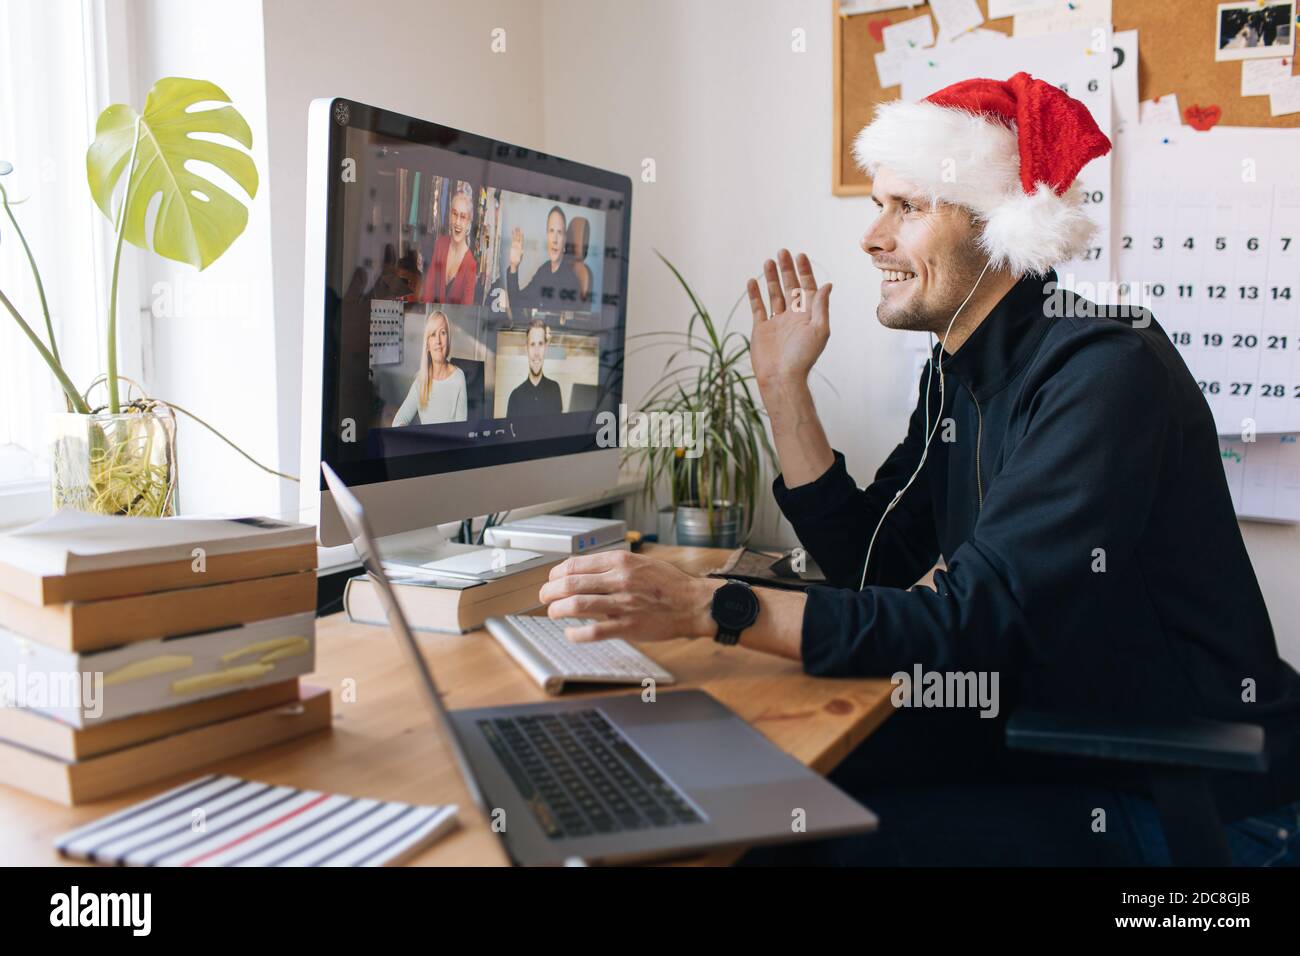 Virtual Christmas day house party. Man smiling wearing Santa hat Business video conferencing Young man having video call via computer in the home xmas Stock Photo